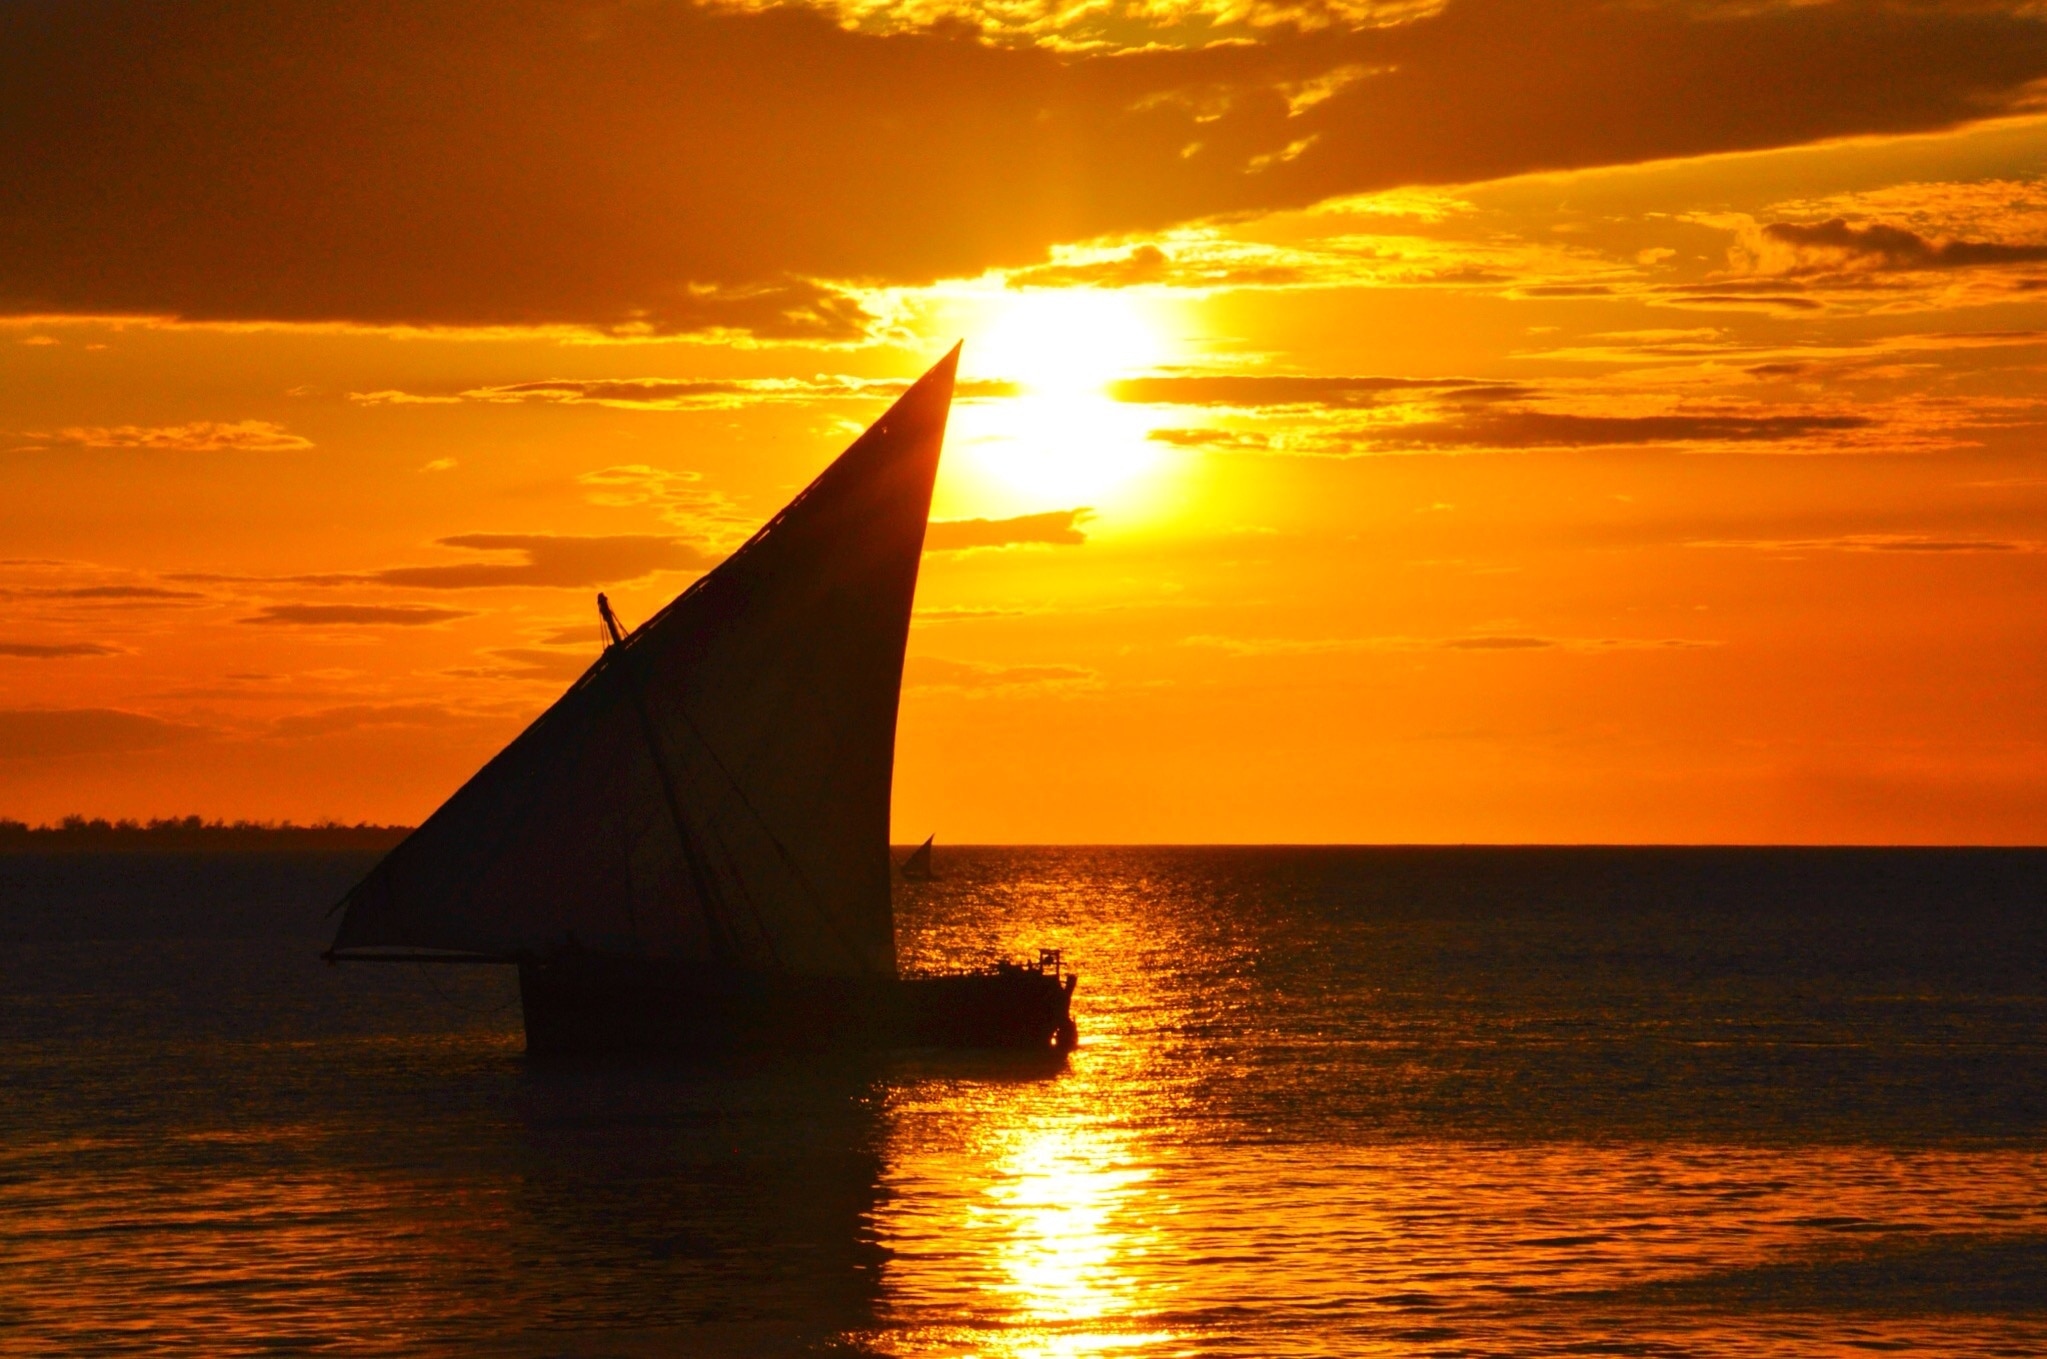 One of the best things to do in Zanzibar is to watch the sunset from the shore. Every evening, crowds of tourists sit on the benches and walk on the beach sand or on the coastal streets just to watch this wonder of nature. Bars and restaurants along shore offer strategic places and (quite expensive) drinks for maximizing the delight of that moment. 

#GoldenHour #waterlust #colorful

See: www.flickr.com/ddfcarvalho